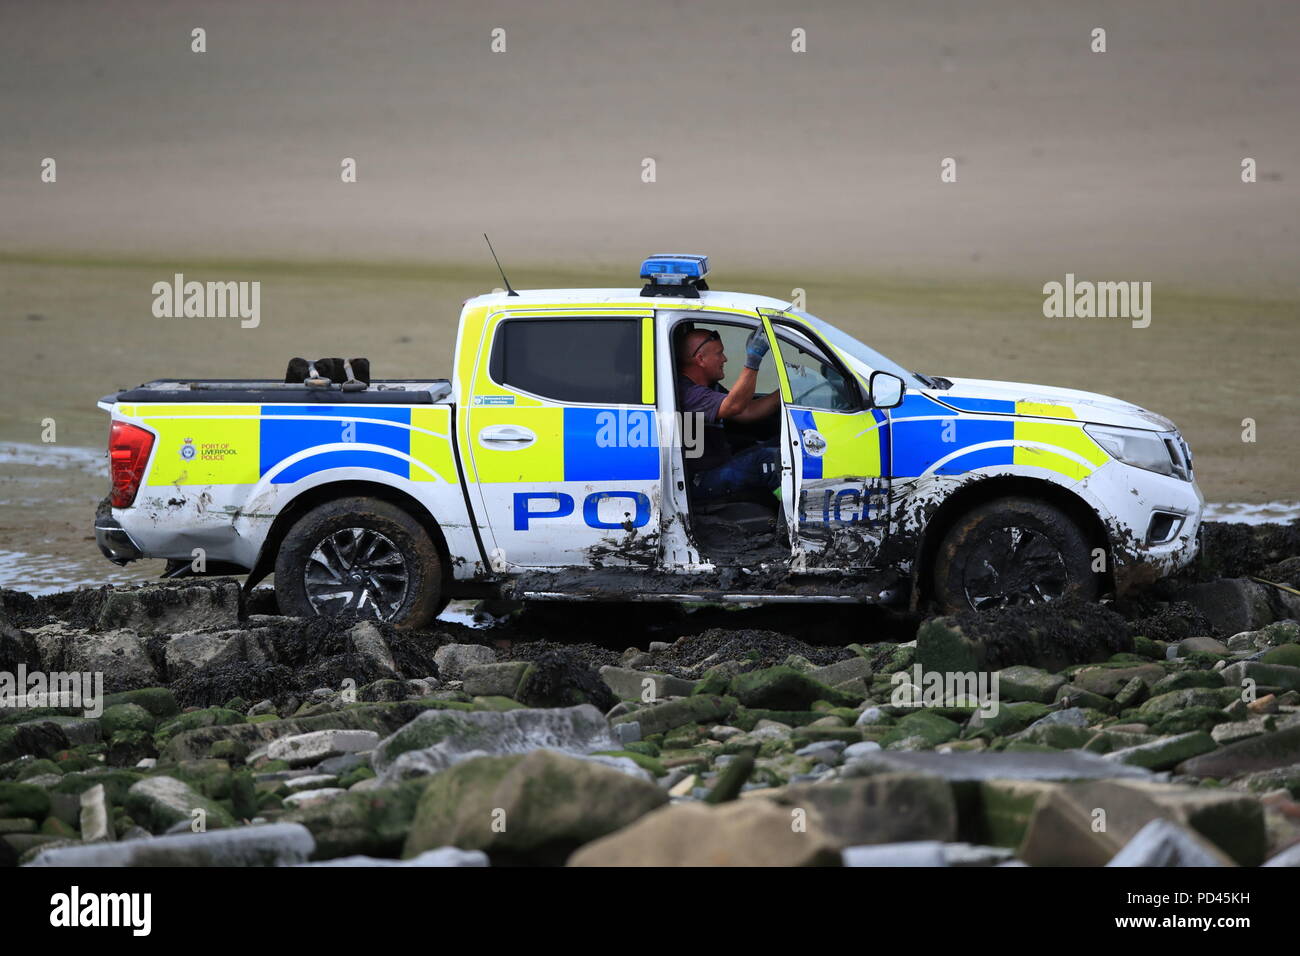 A Port of Liverpool Police vehicle is extracted after it became stuck in  the mud on Crosby beach in Merseyside during a search for a missing woman.  Officers had been forced to